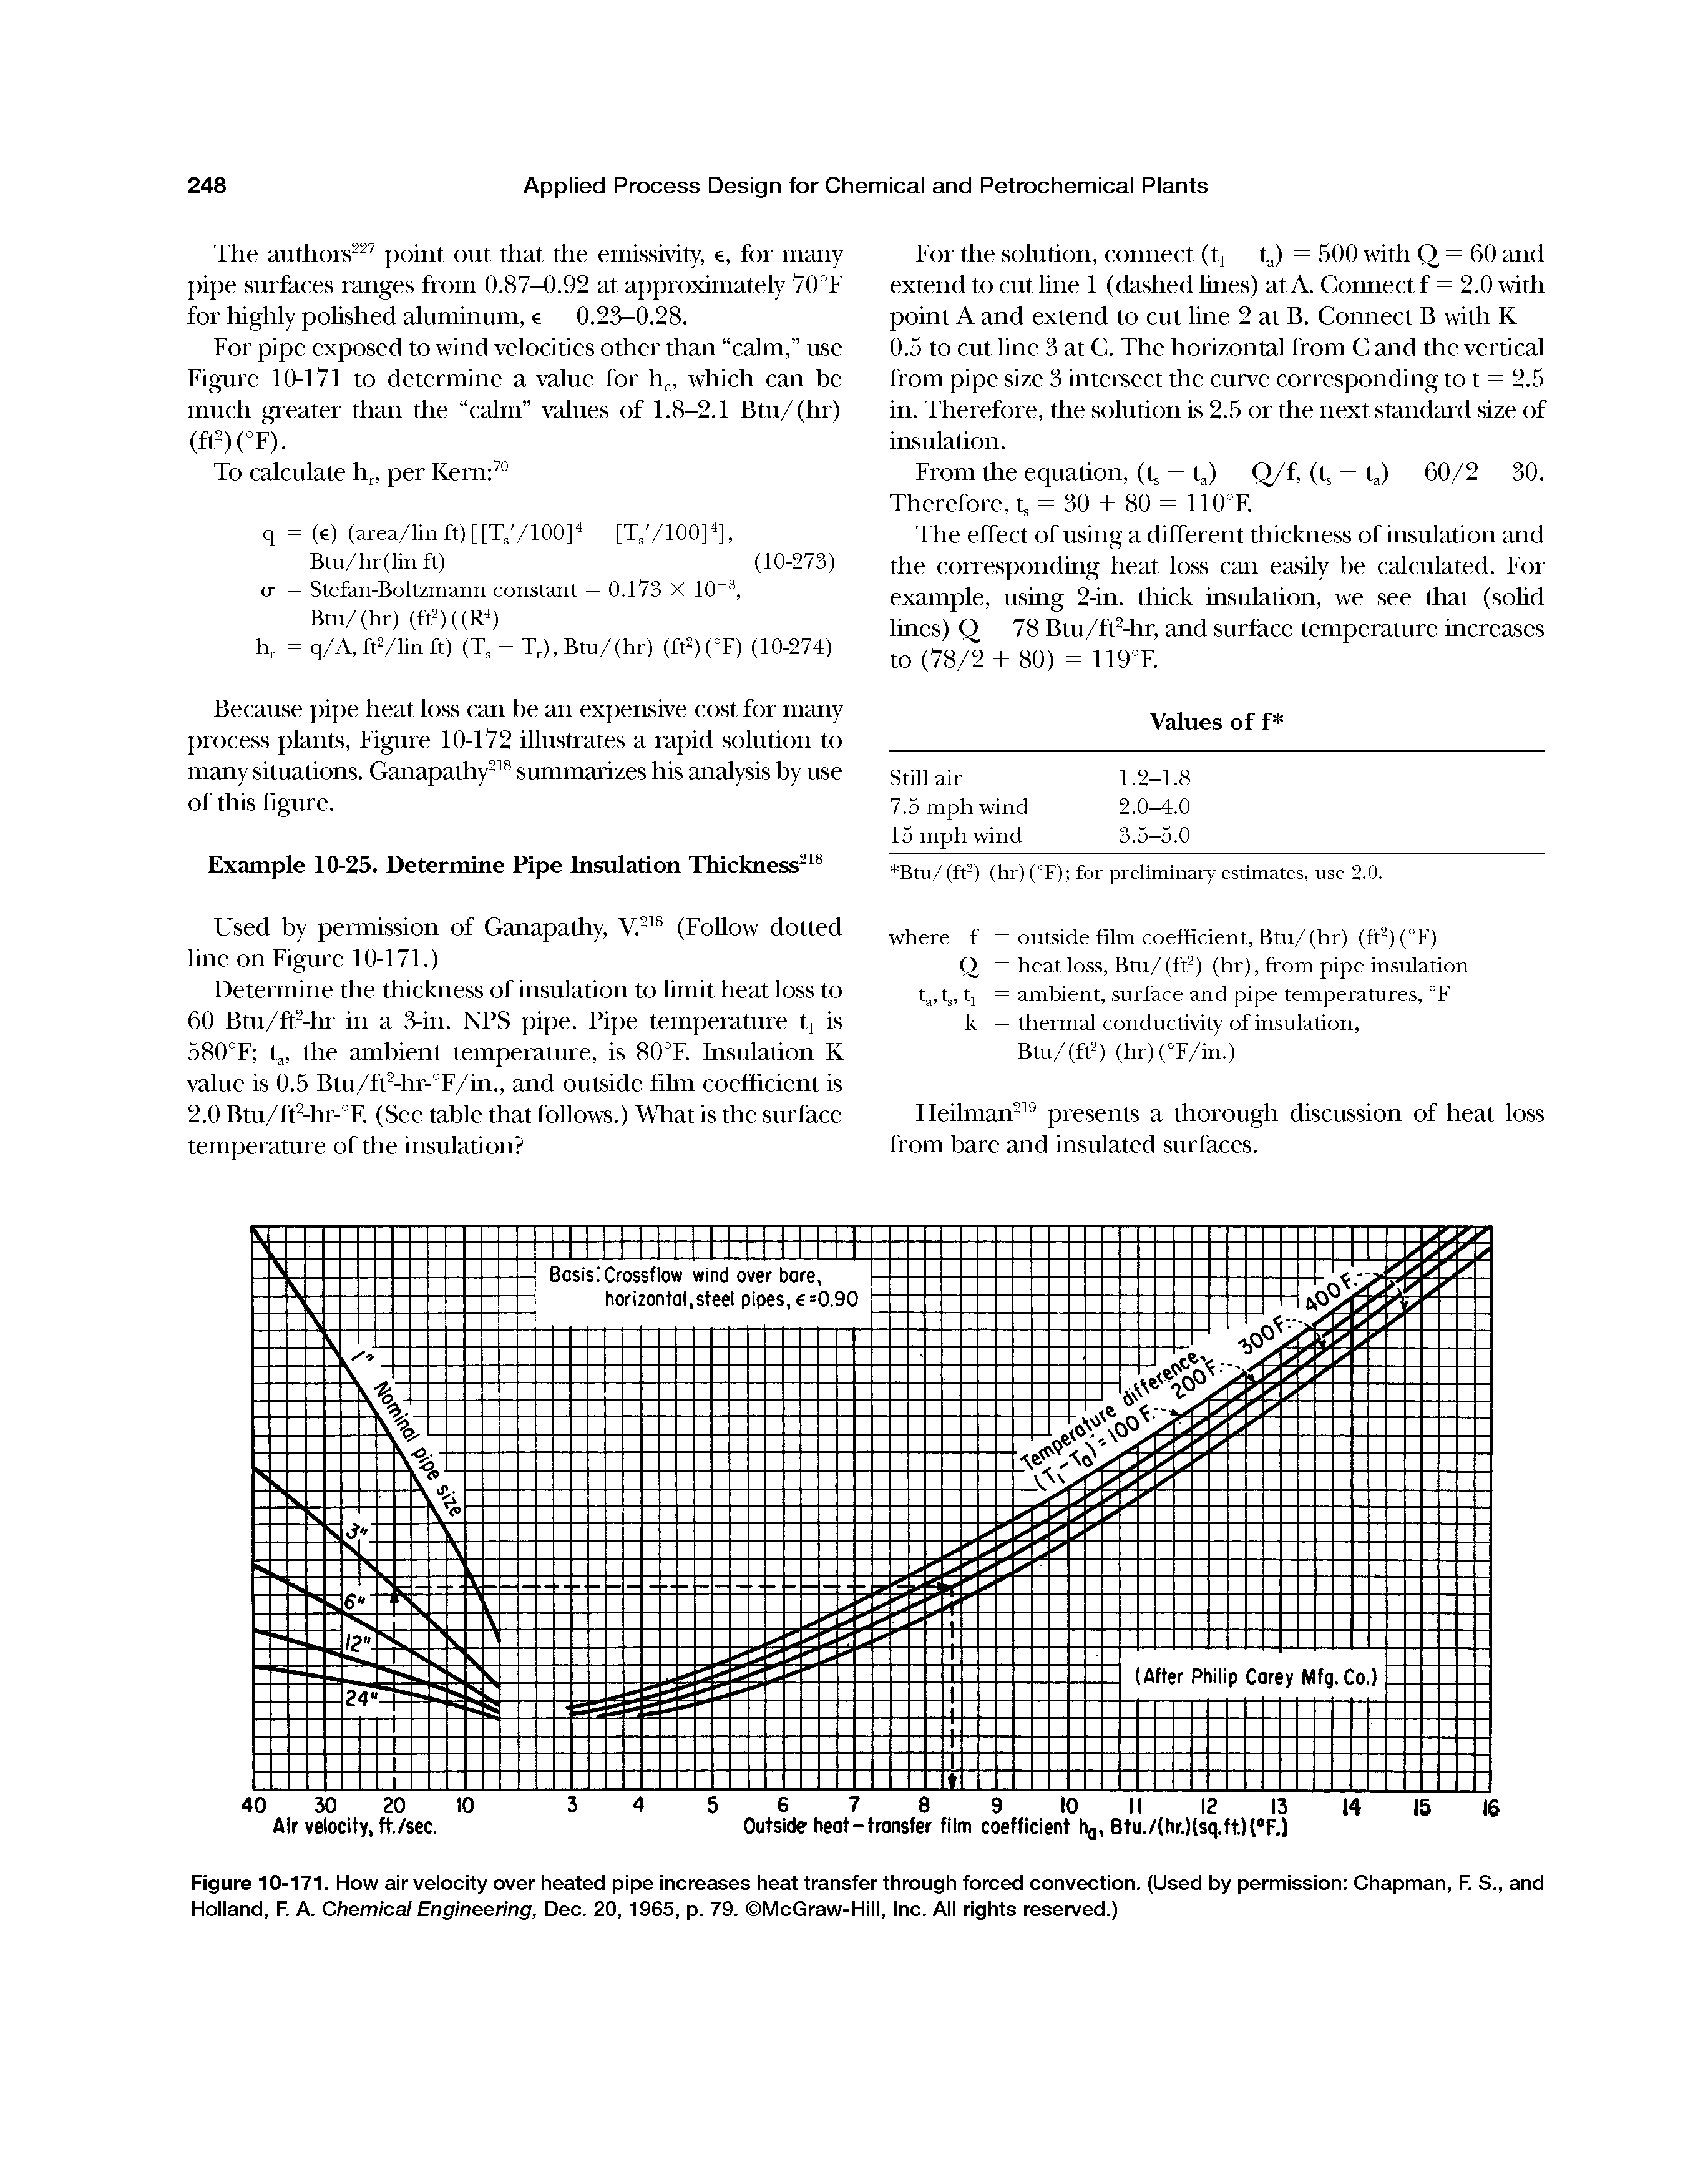 Figure 10-171. How air velocity over heated pipe increases heat transfer through forced convection. (Used by permission Chapman, F. S., and Holland, F. A. Chemical Engineering, Dec. 20, 1965, p. 79. McGraw-Hill, Inc. All rights reserved.)...